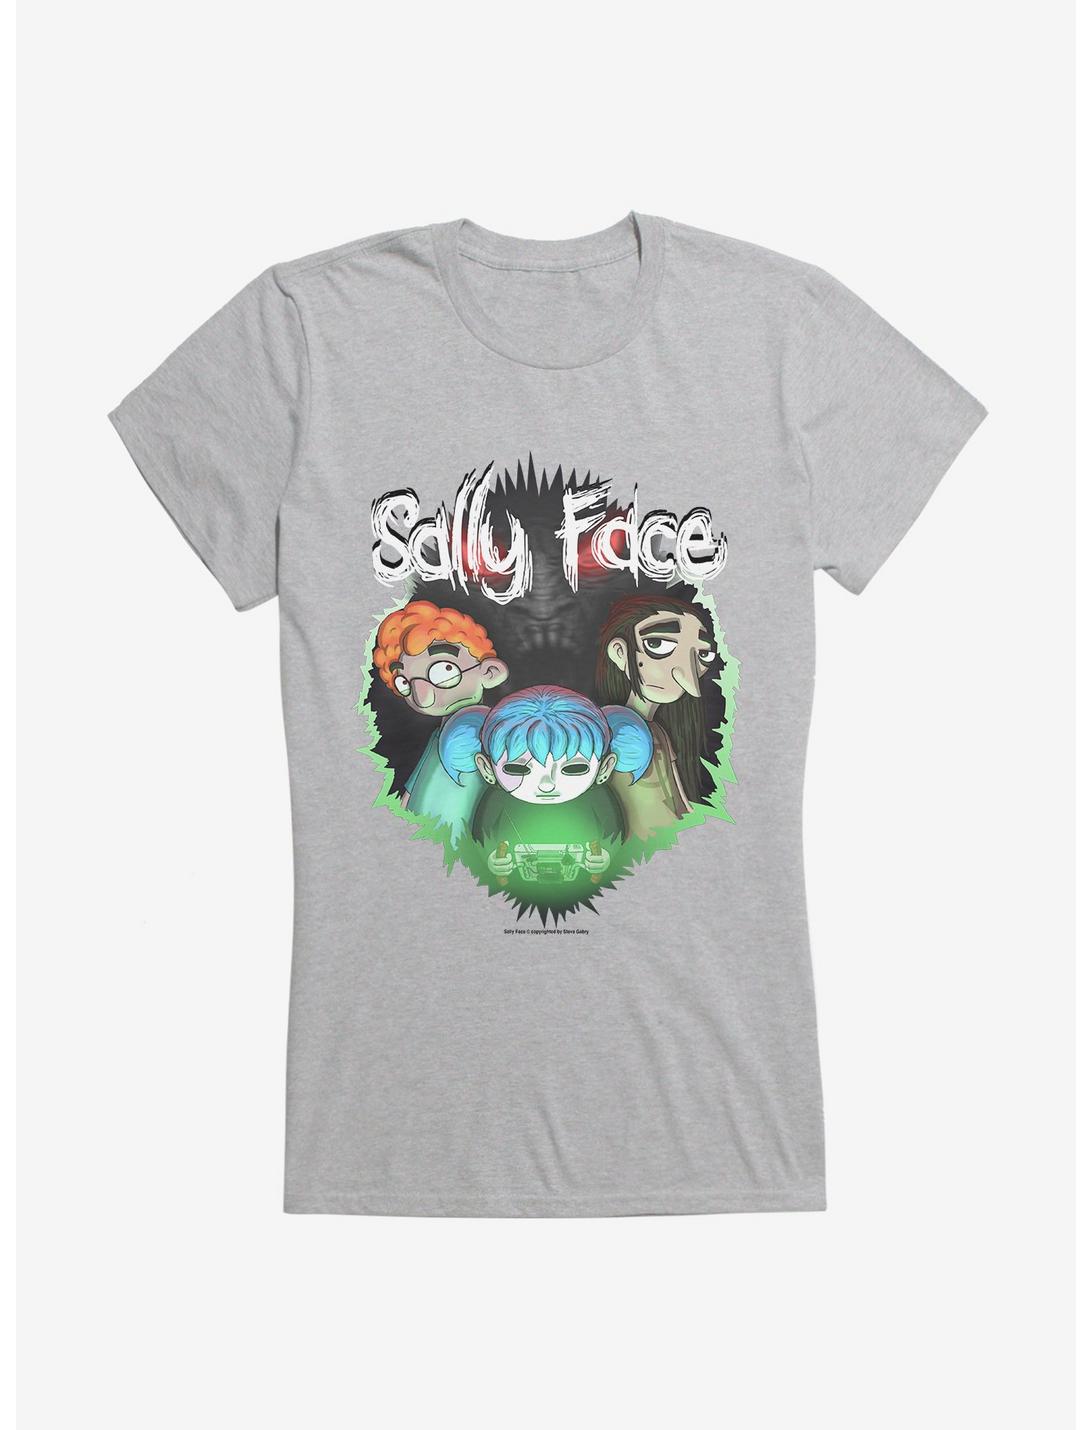 Sally Face Episode Two: The Wretched Girls T-Shirt, HEATHER, hi-res